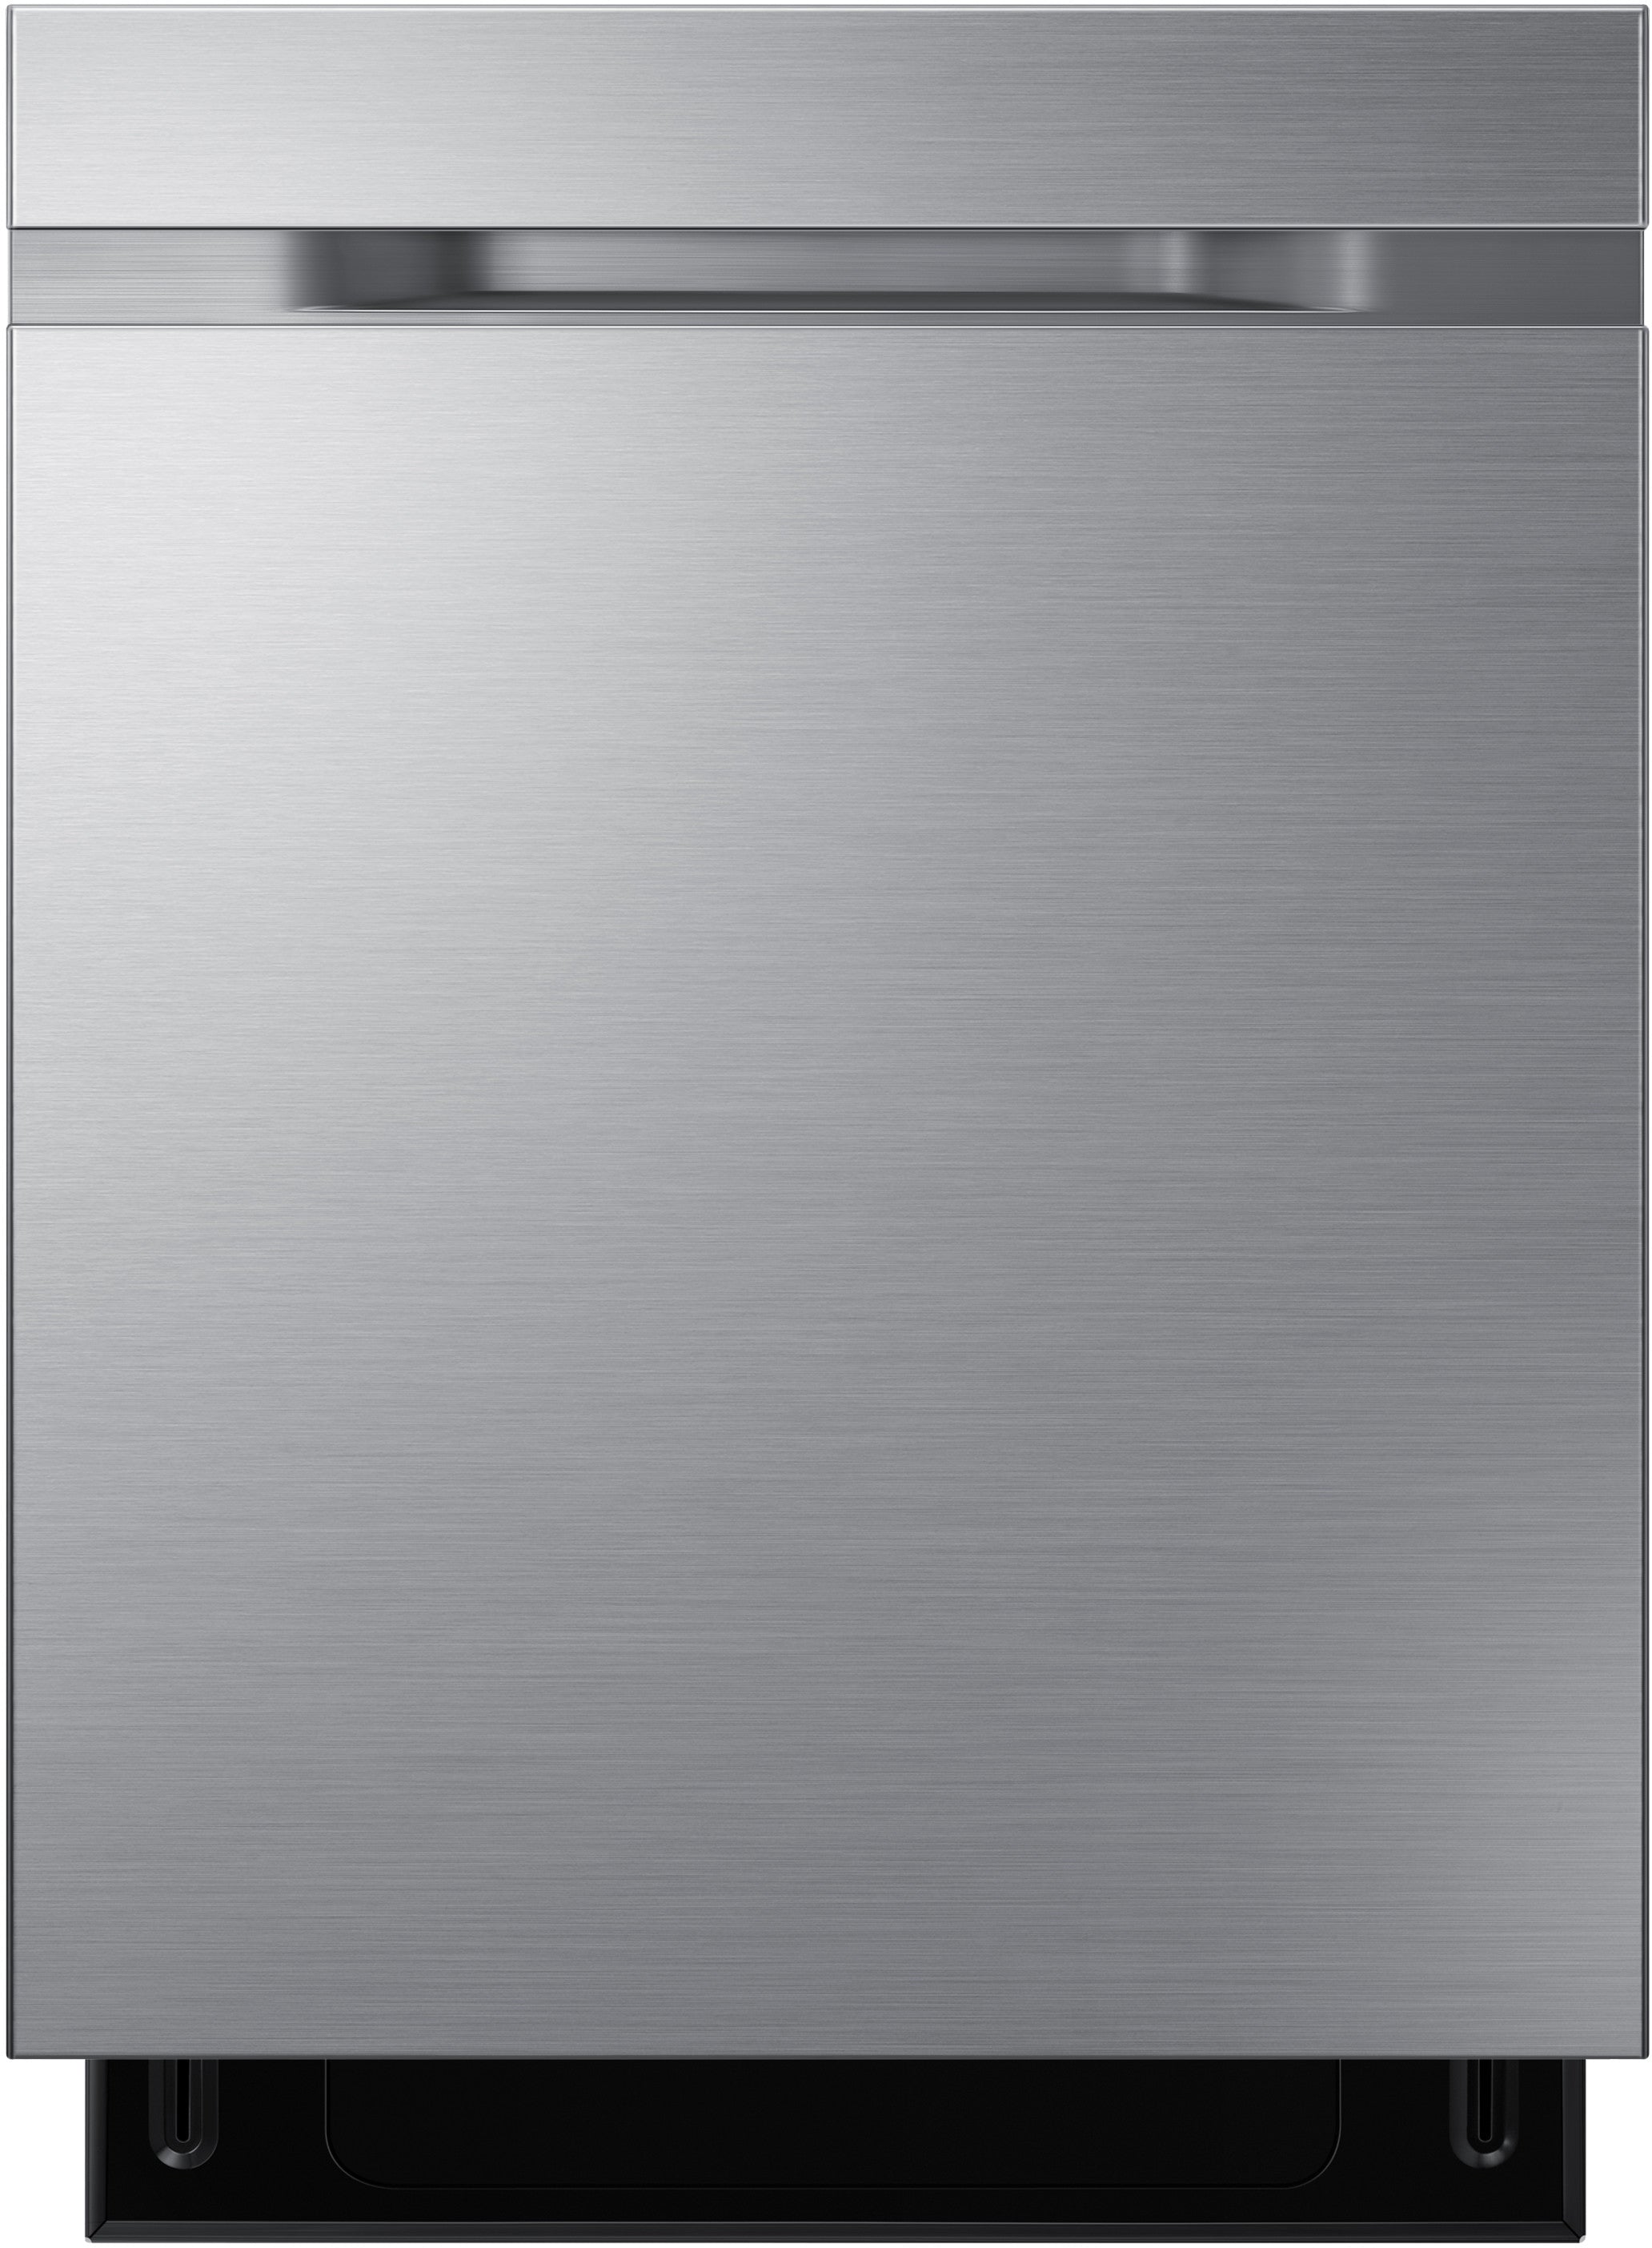 Samsung DW80H9930US/AA 24" Built-in Dishwasher